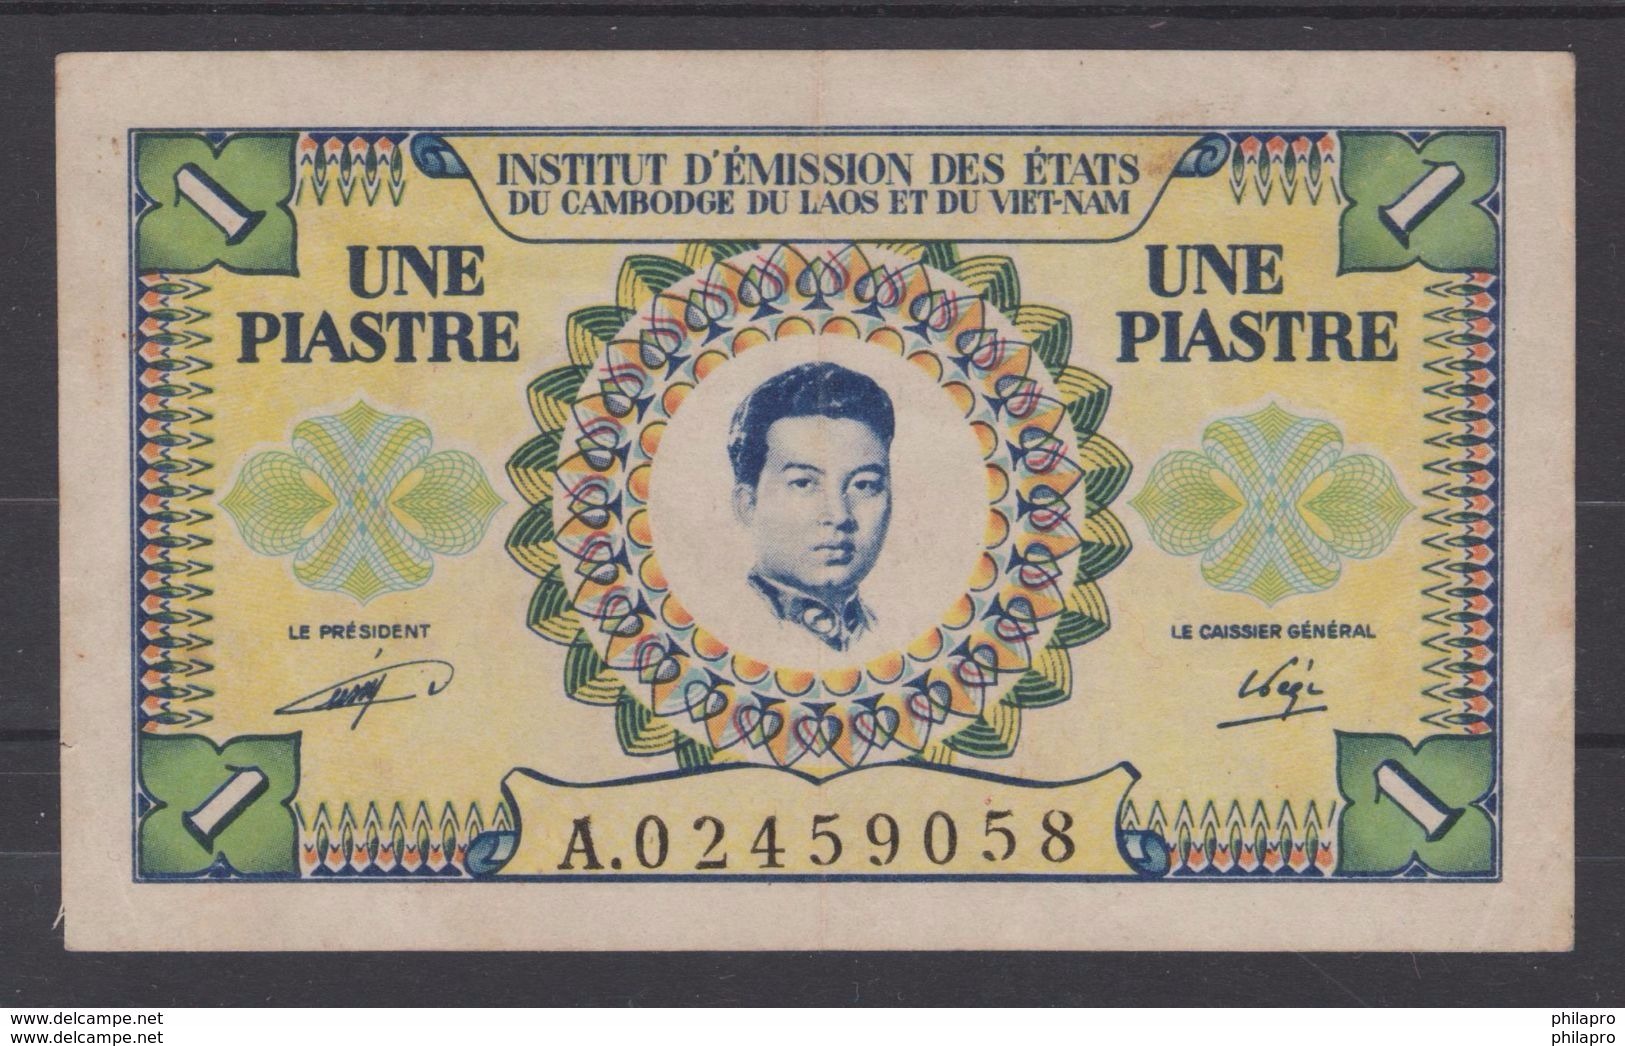 INDOCHINE CAMBODGE LAOS VIETNAM    NOTES $1 SIHANOUK  COMBINED ISSUED. F/VF  Réf  3Q3 - Indochine